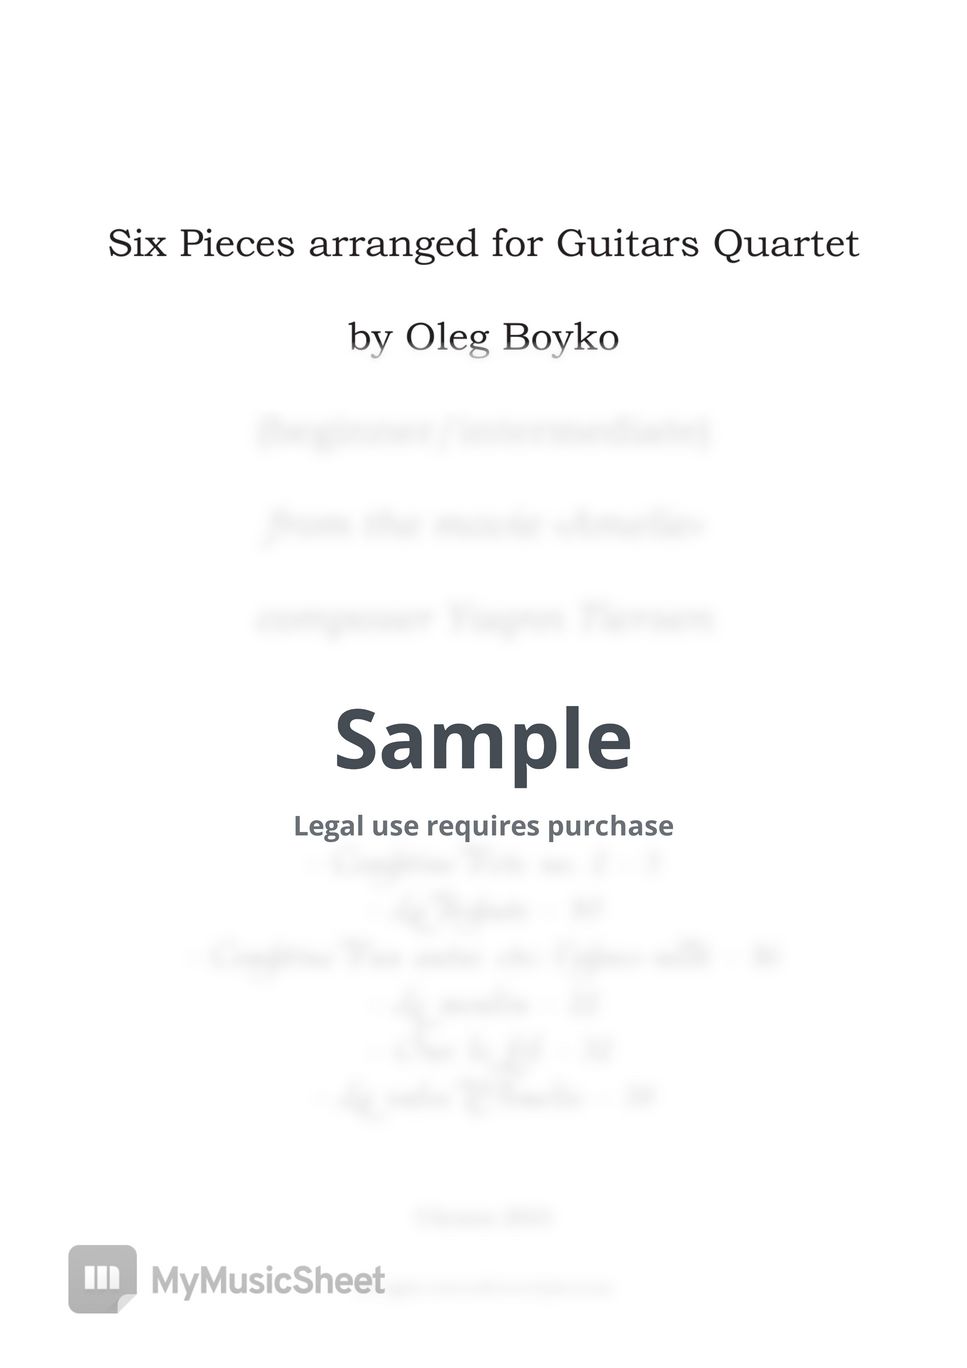 Six Pieces arranged for Guitars Quartet from the movie "Amelie" by Oleg Boyko